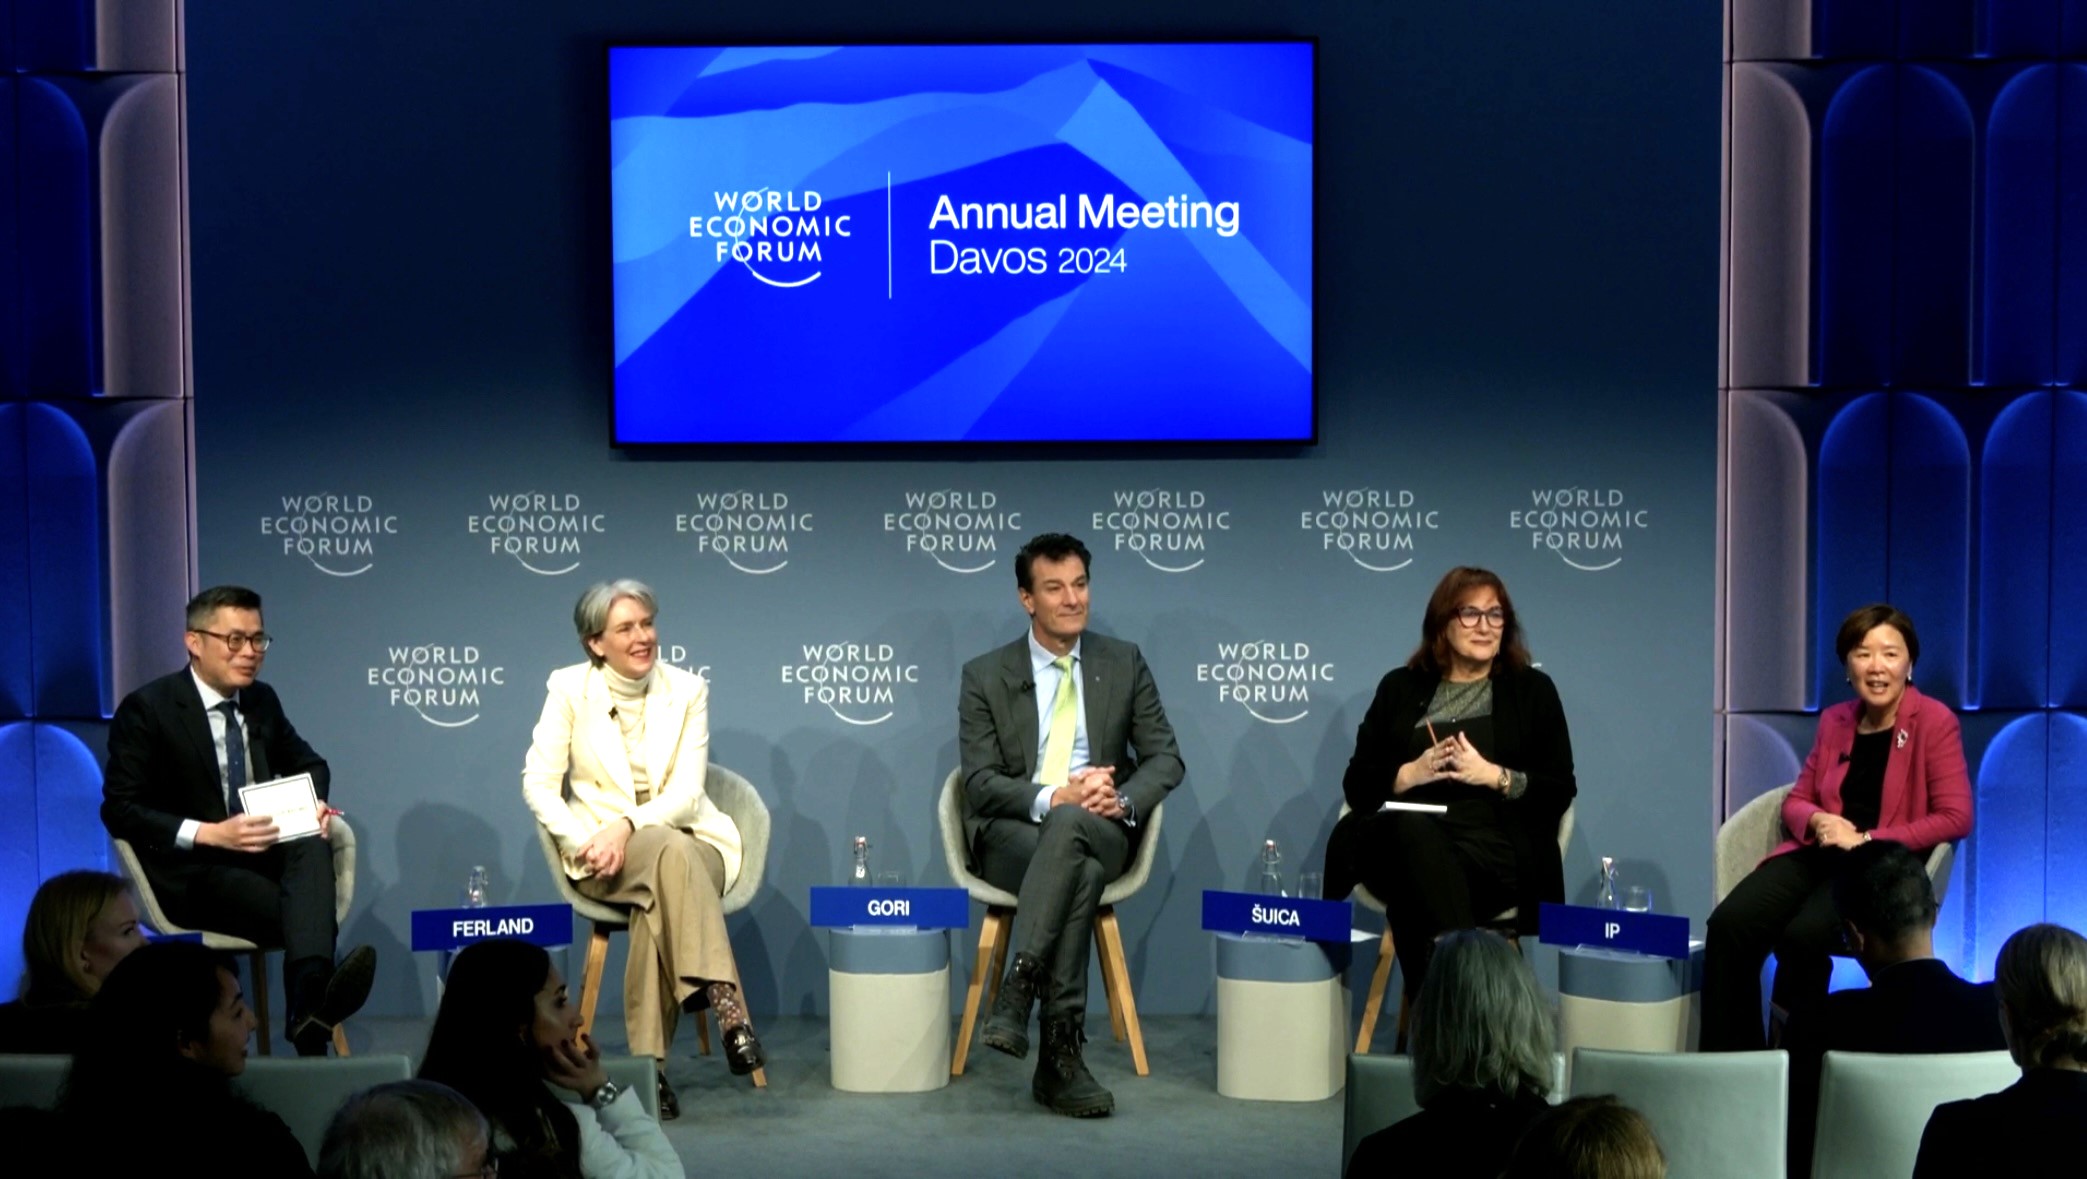 Prof. Ip (right) shares insights with prominent leaders from European Commission, Manulife Financial and Mercer (Marsh McLennan) on the panel “Navigating Longer Lifespans”. (Photo credit: The World Economic Forum) 